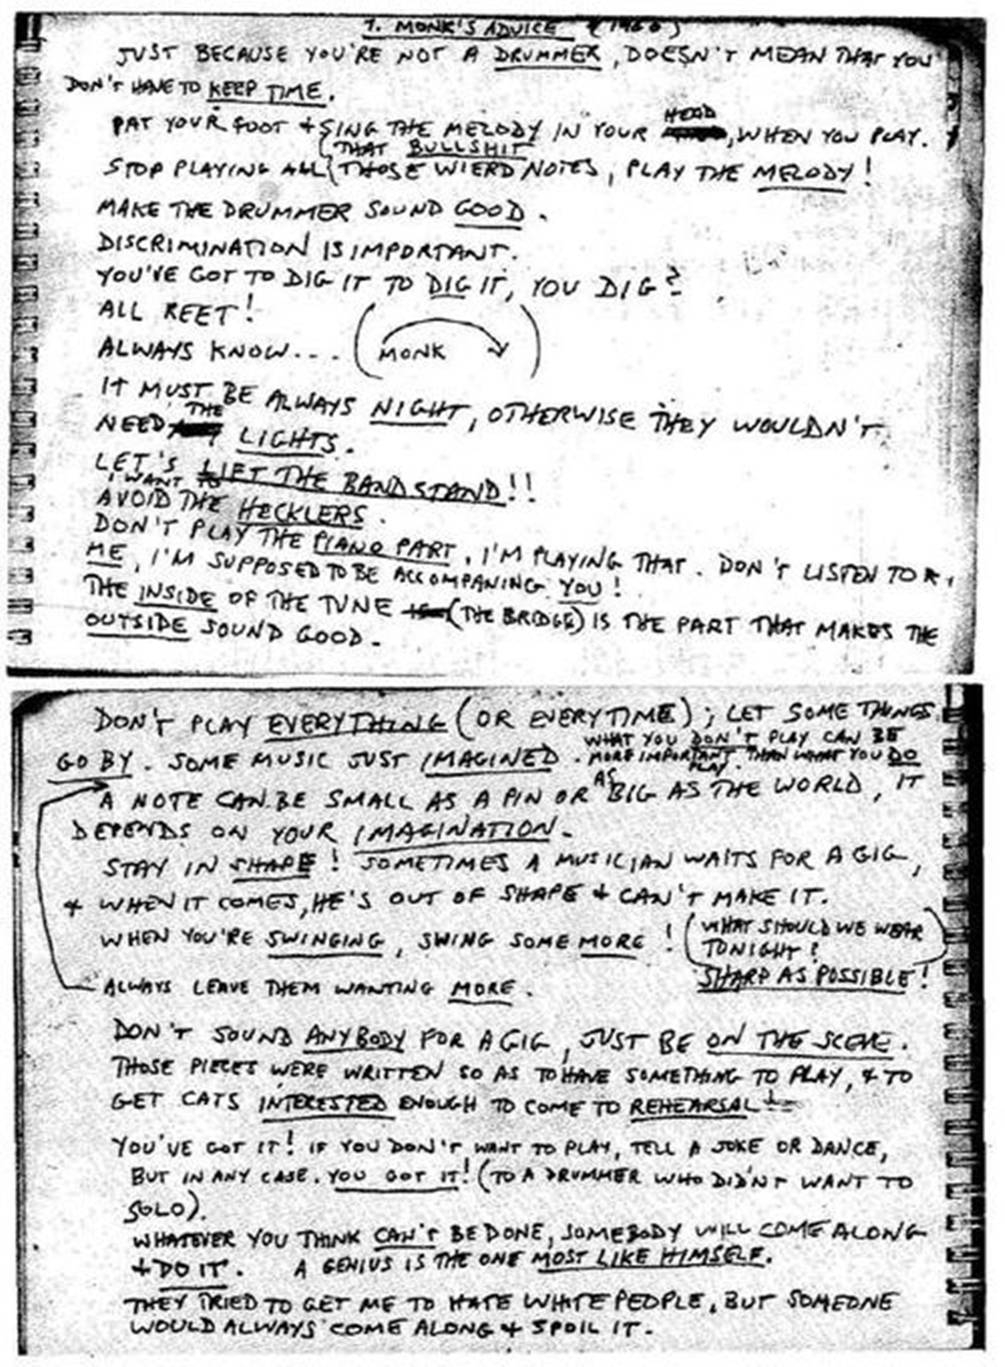 Thelonious Monk’s 25 Tips for Musicians (1960